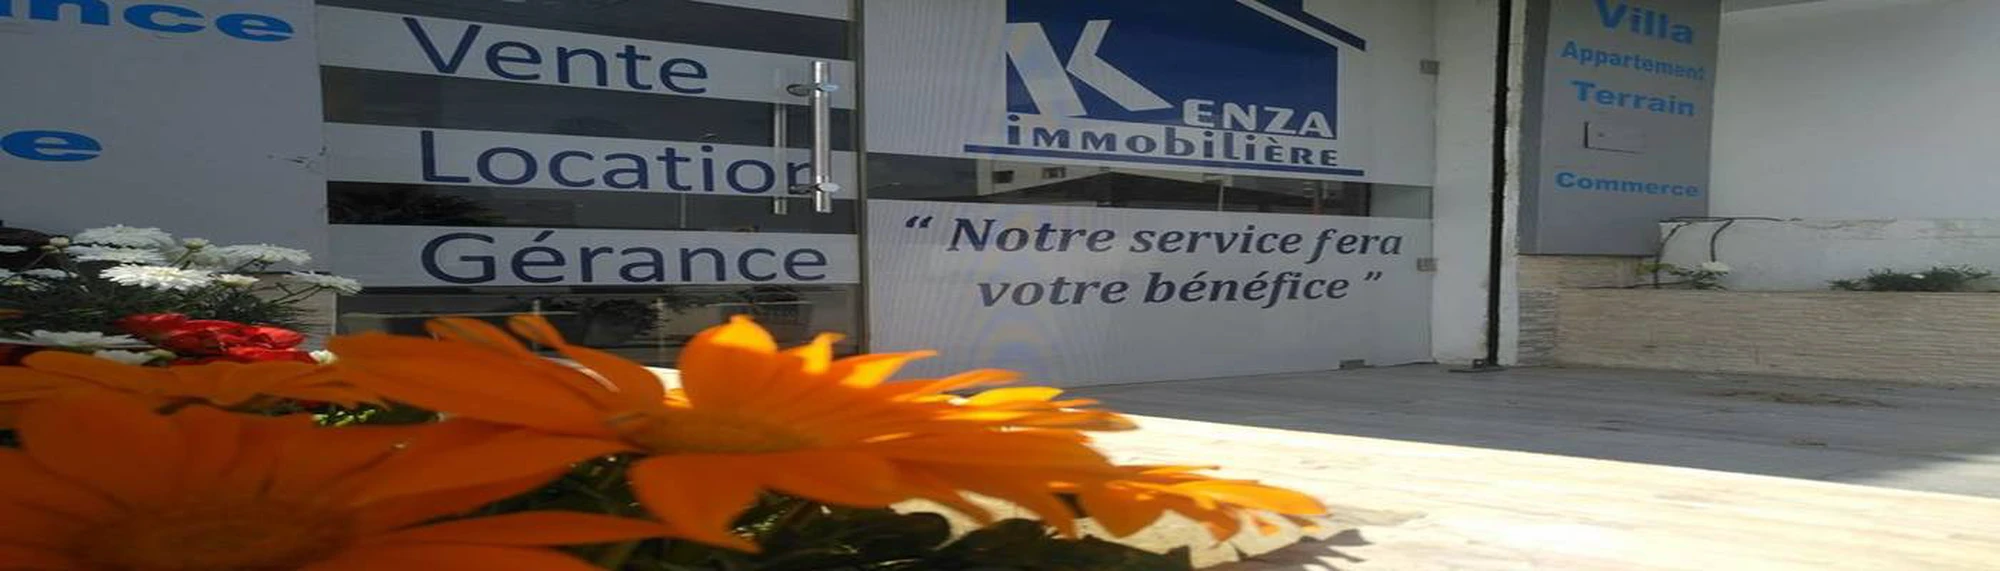 tayara shop cover of Agence Kenza Immobiliere